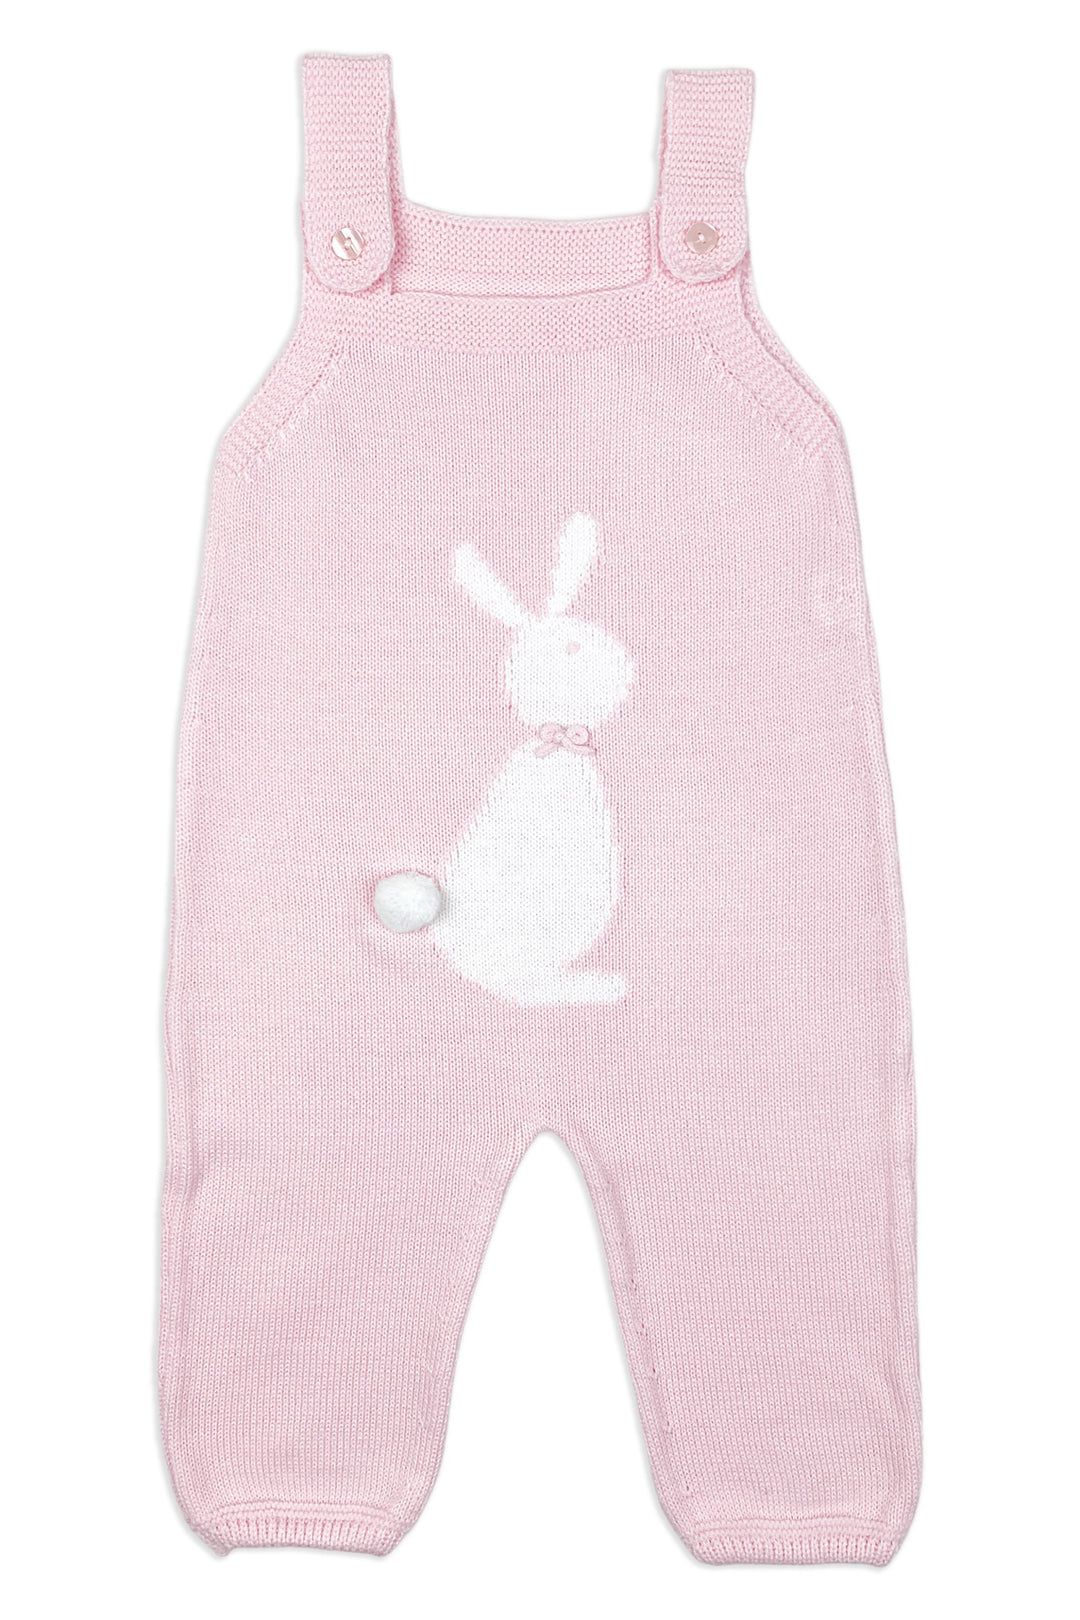 Granlei "Casey" Baby Pink Knitted Bunny Dungarees | Millie and John